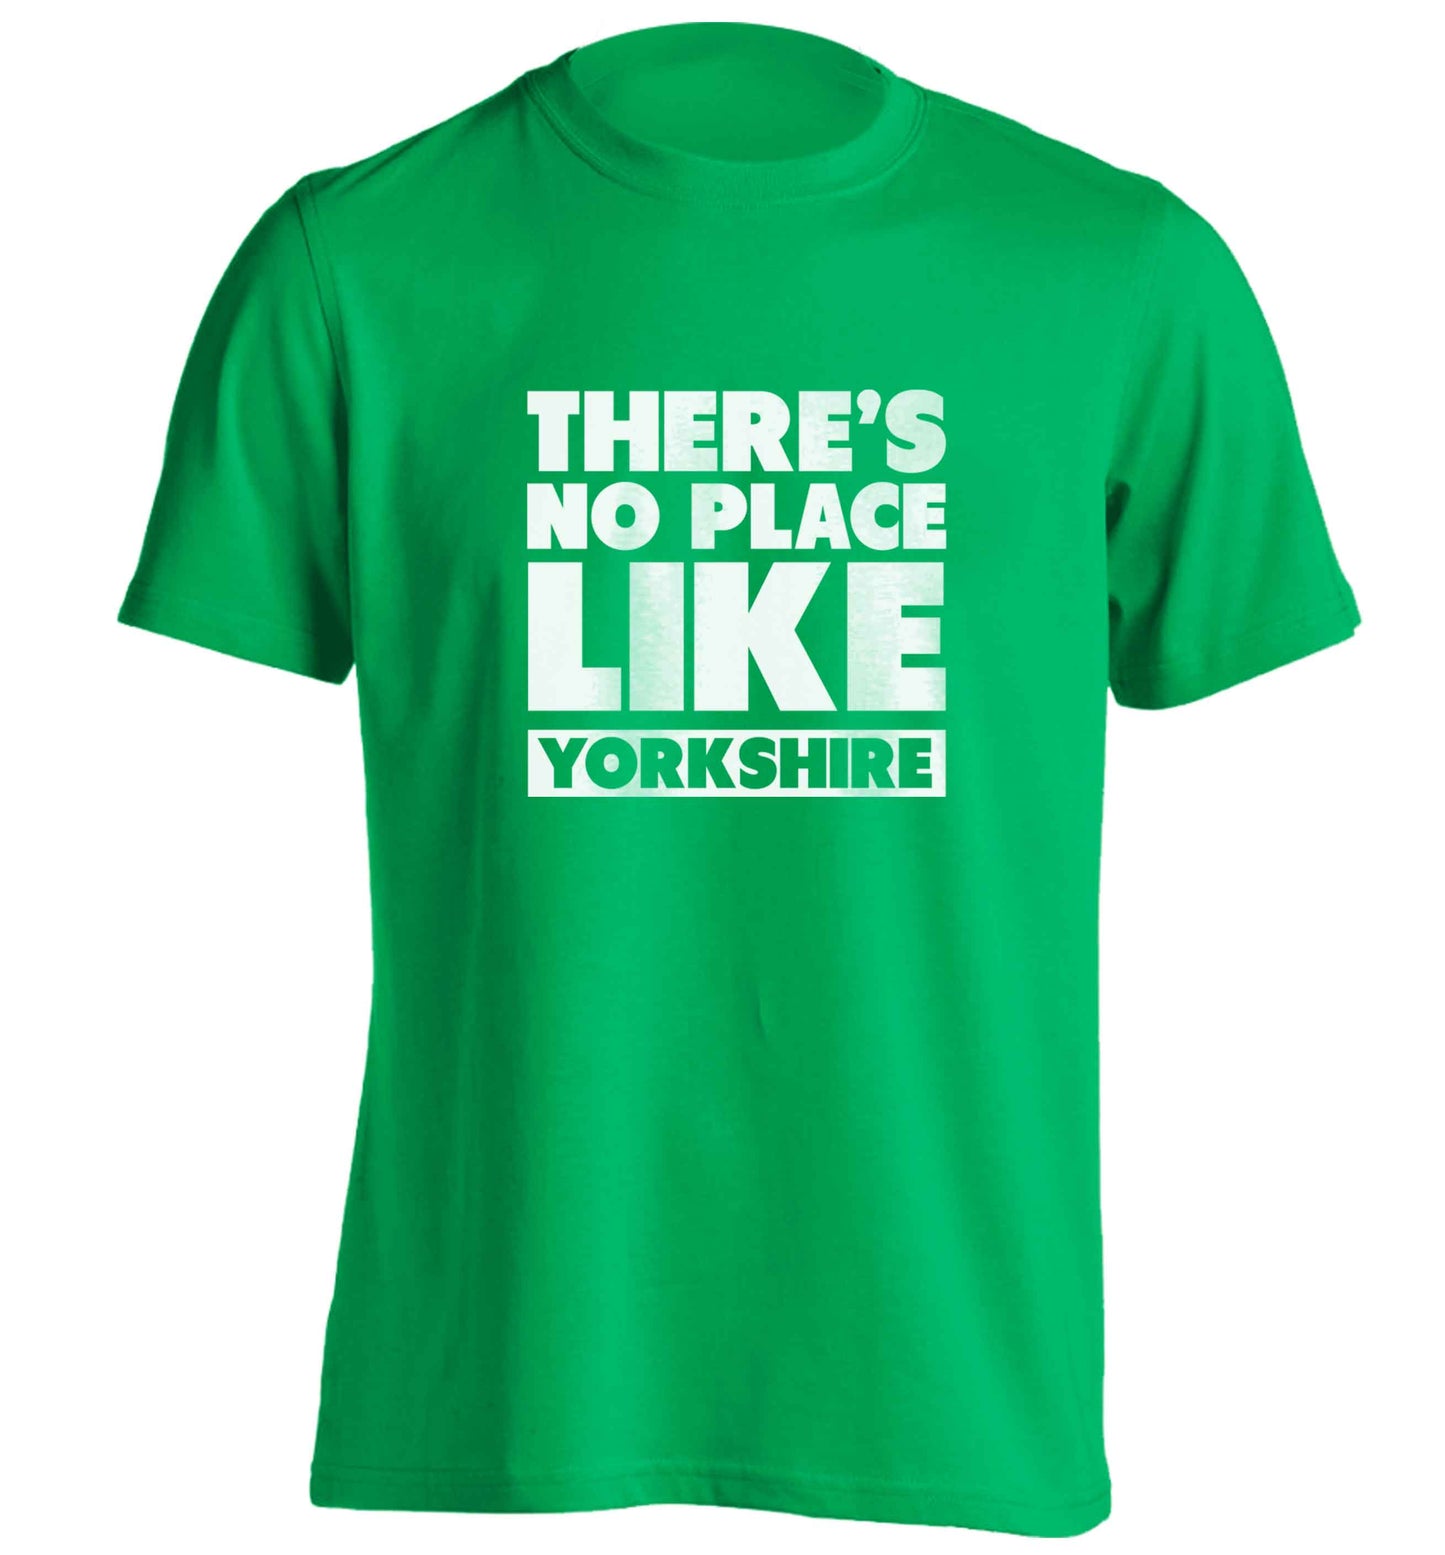 There's no place like Yorkshire adults unisex green Tshirt 2XL